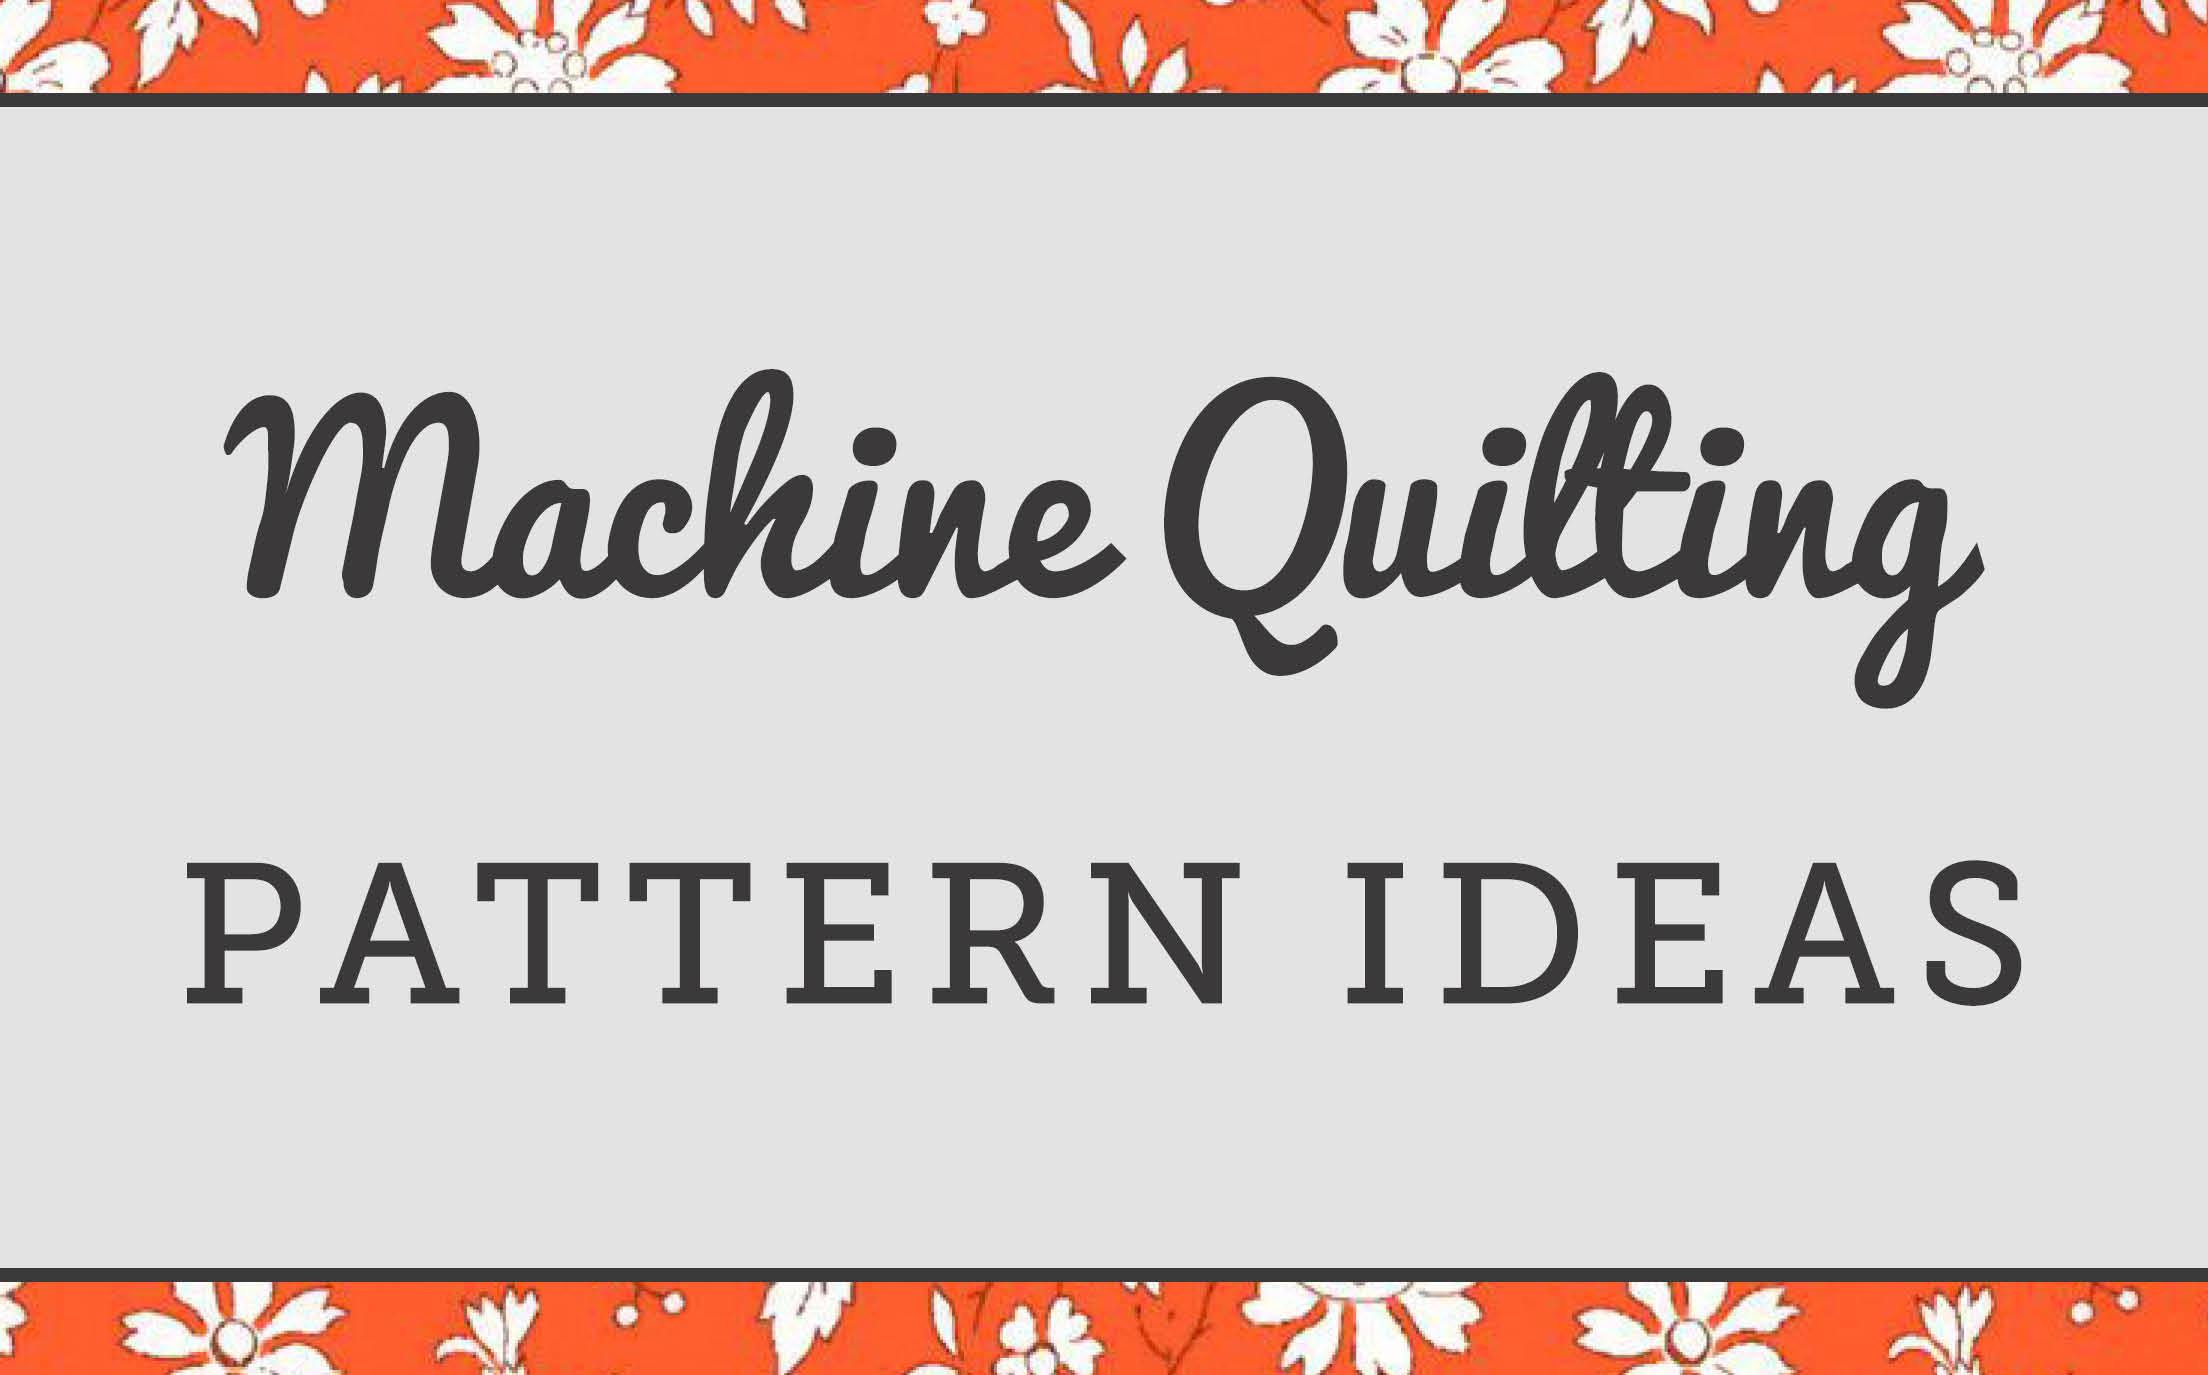 Maching quilting pattern ideas text